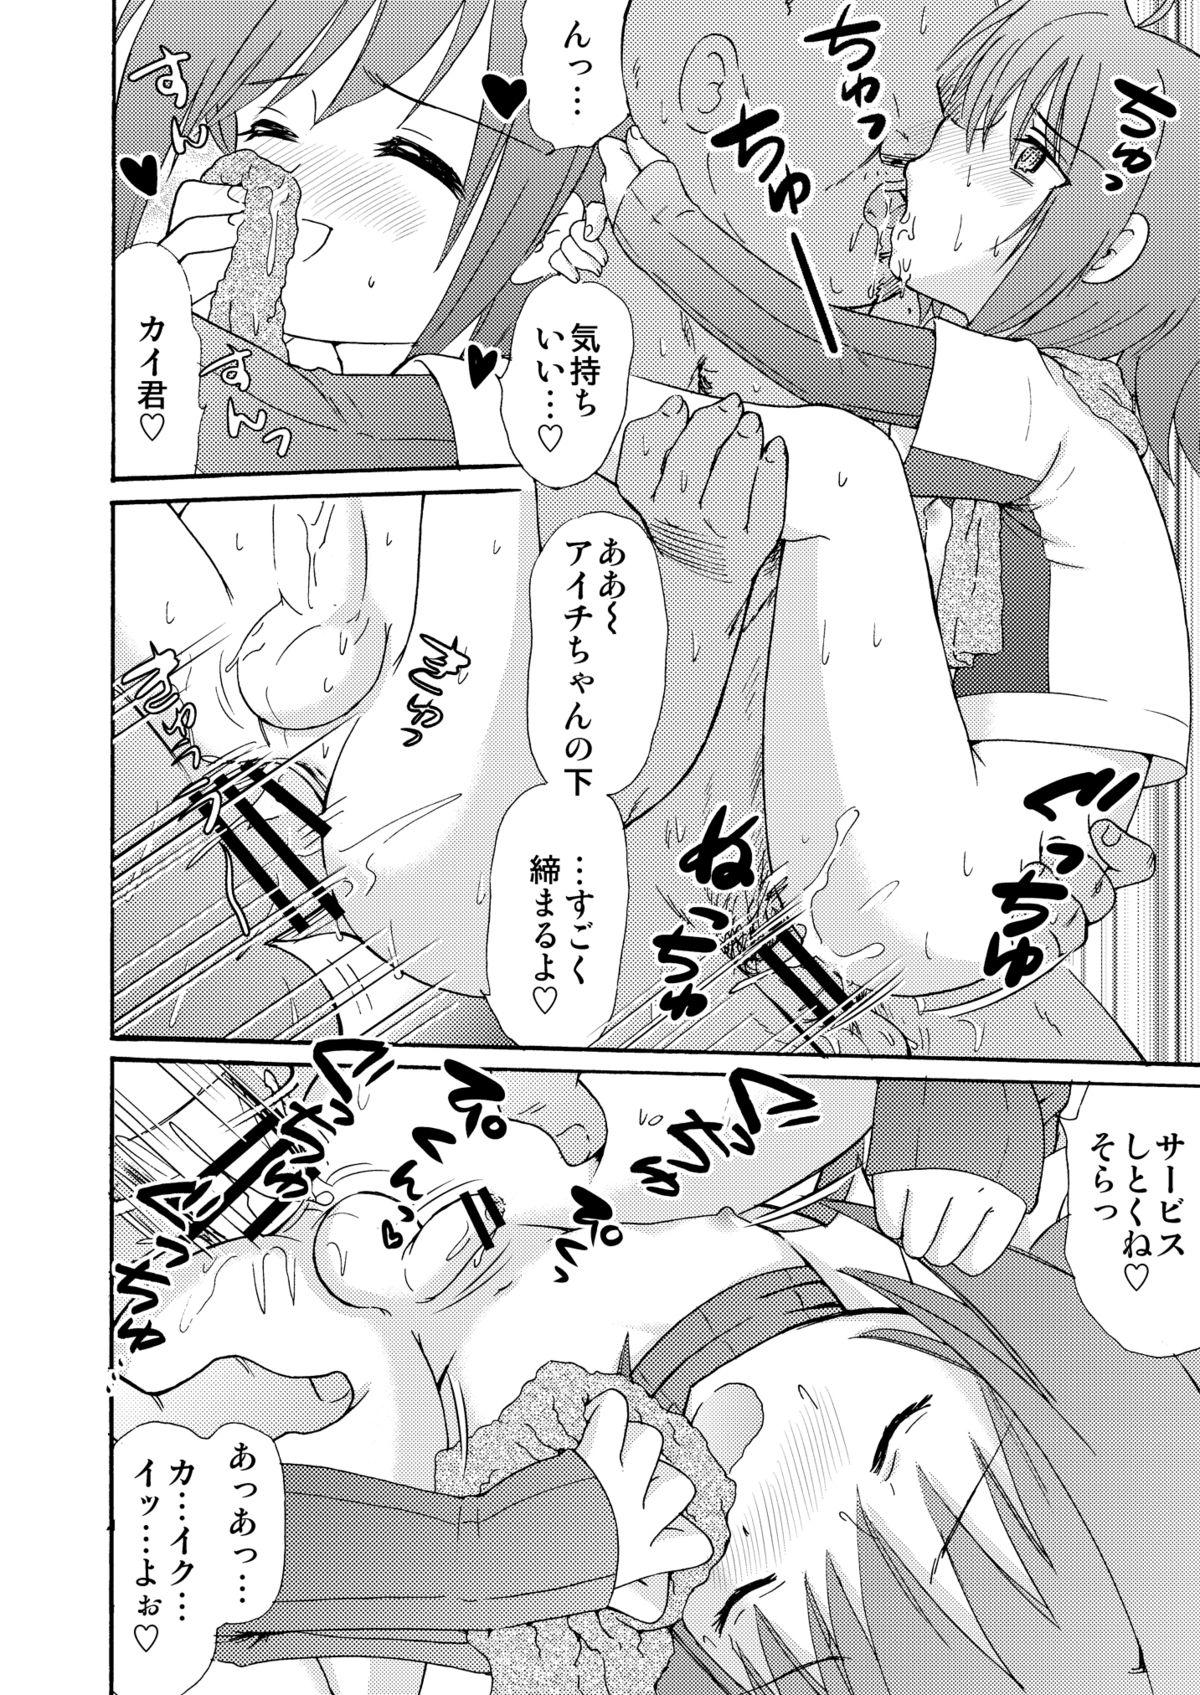 Officesex Koi no Uta - Cardfight vanguard Natural Boobs - Page 8